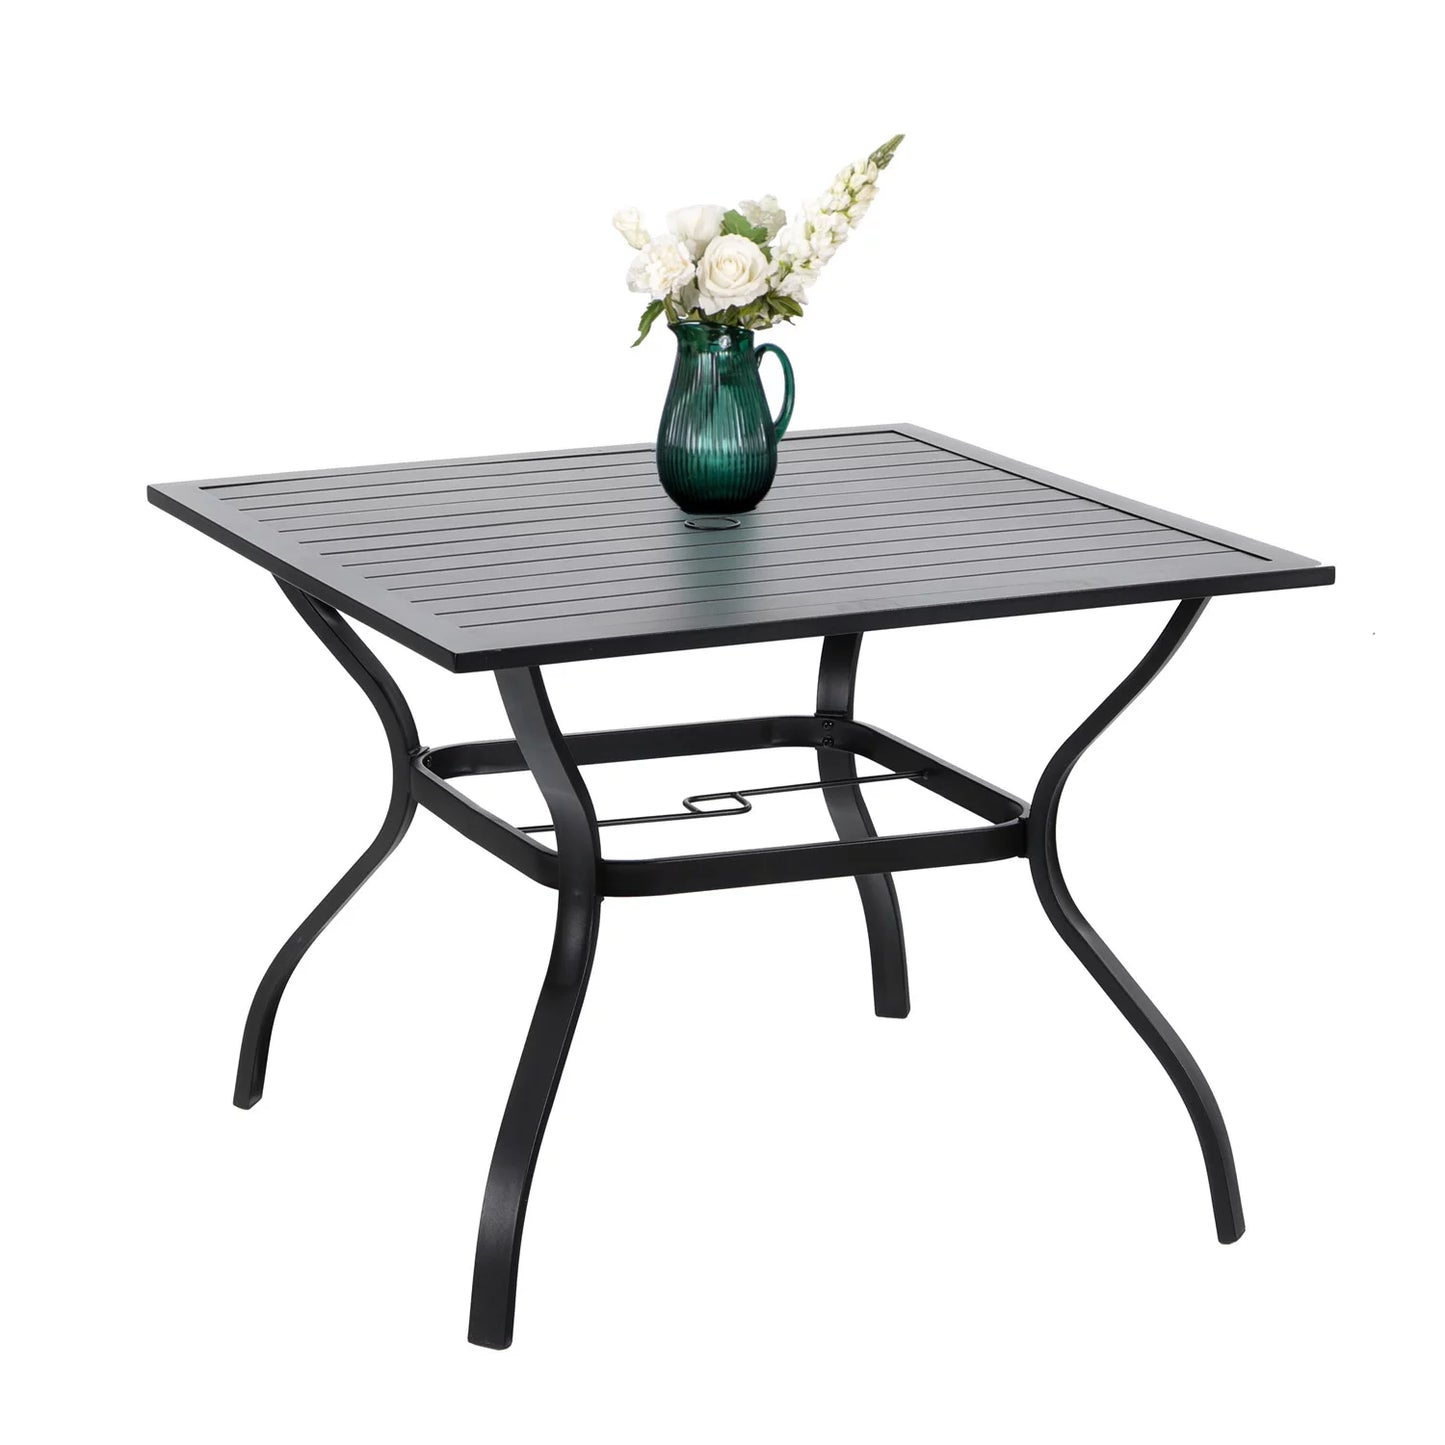 Sophia & William 37" Outdoor Square Dining Table with Steel Frame for 4 Chairs